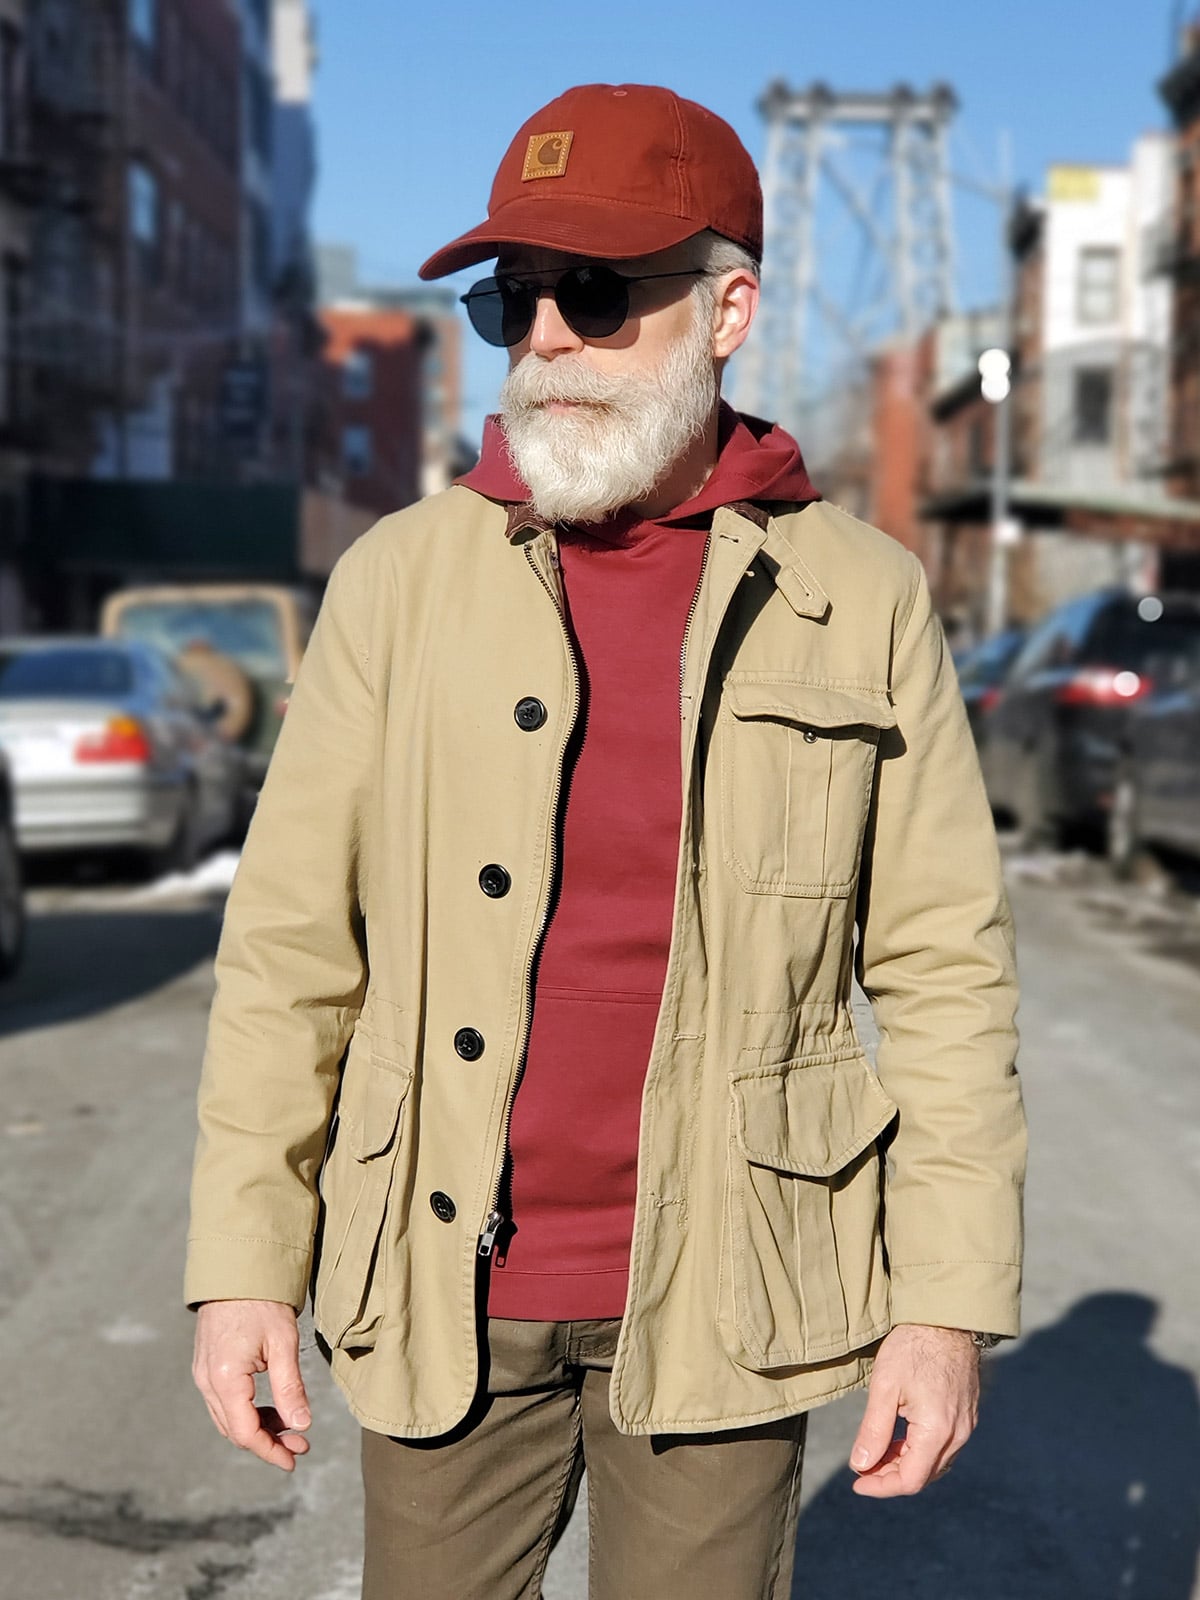 Layered Field Jacket and Hoodie - The Modest Man